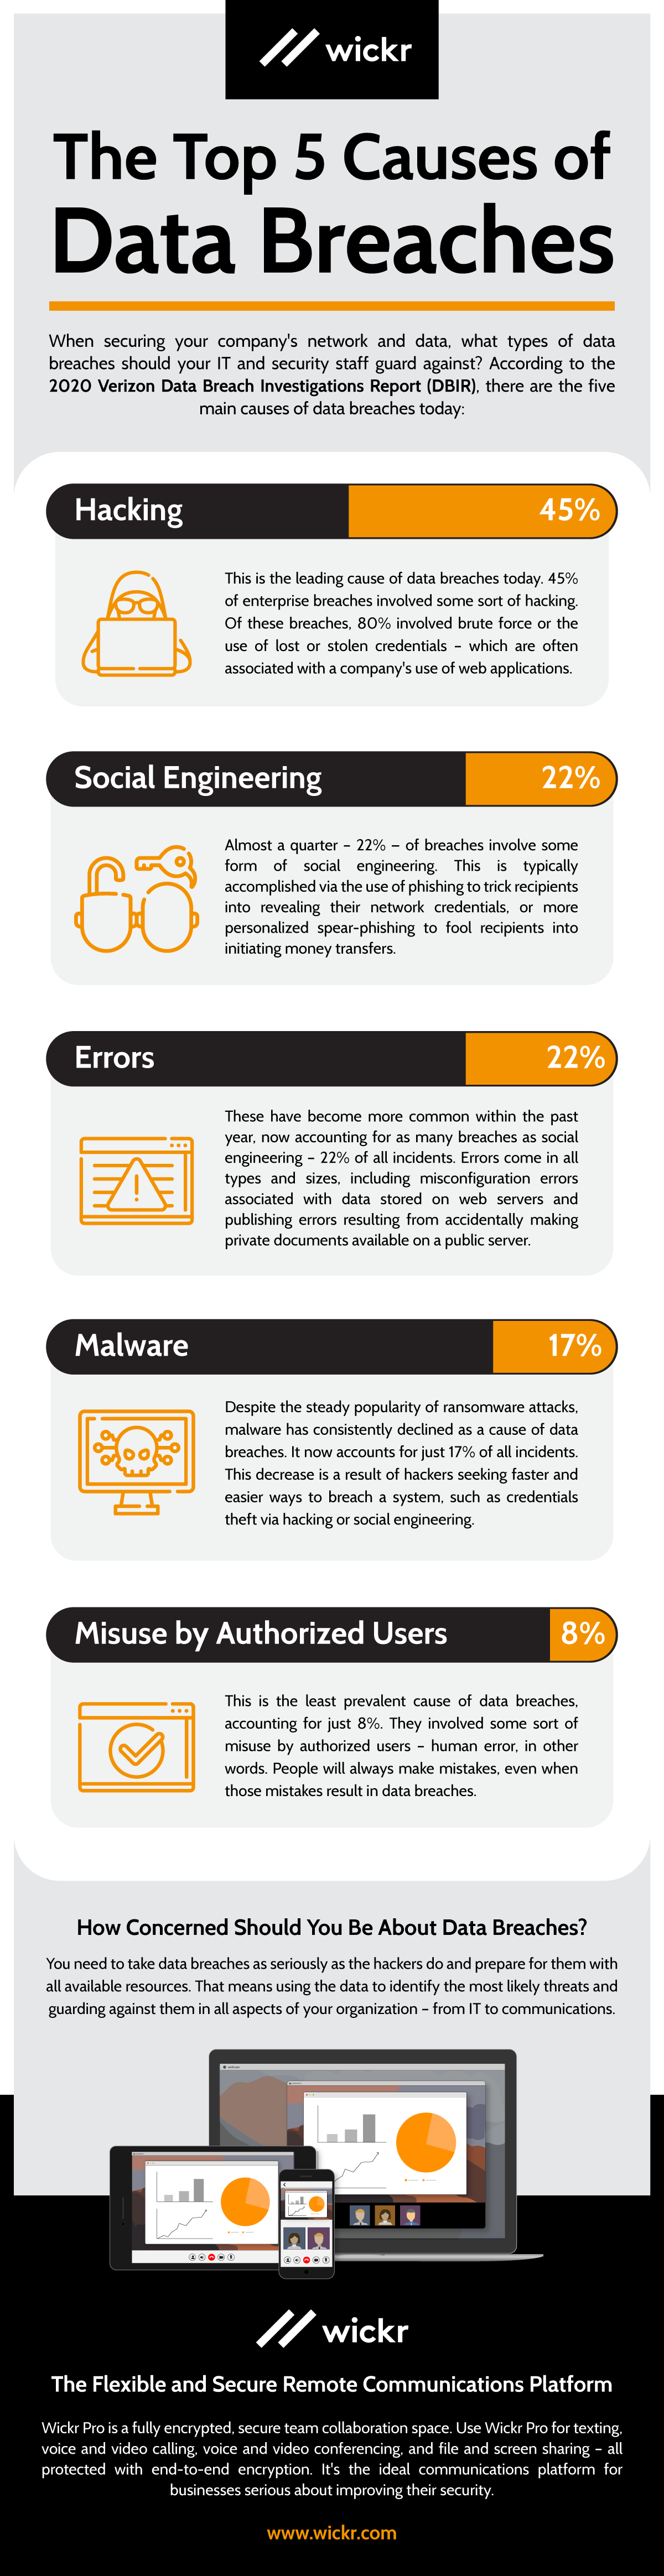 The Top 5 Causes of Data Breaches AWS Wickr